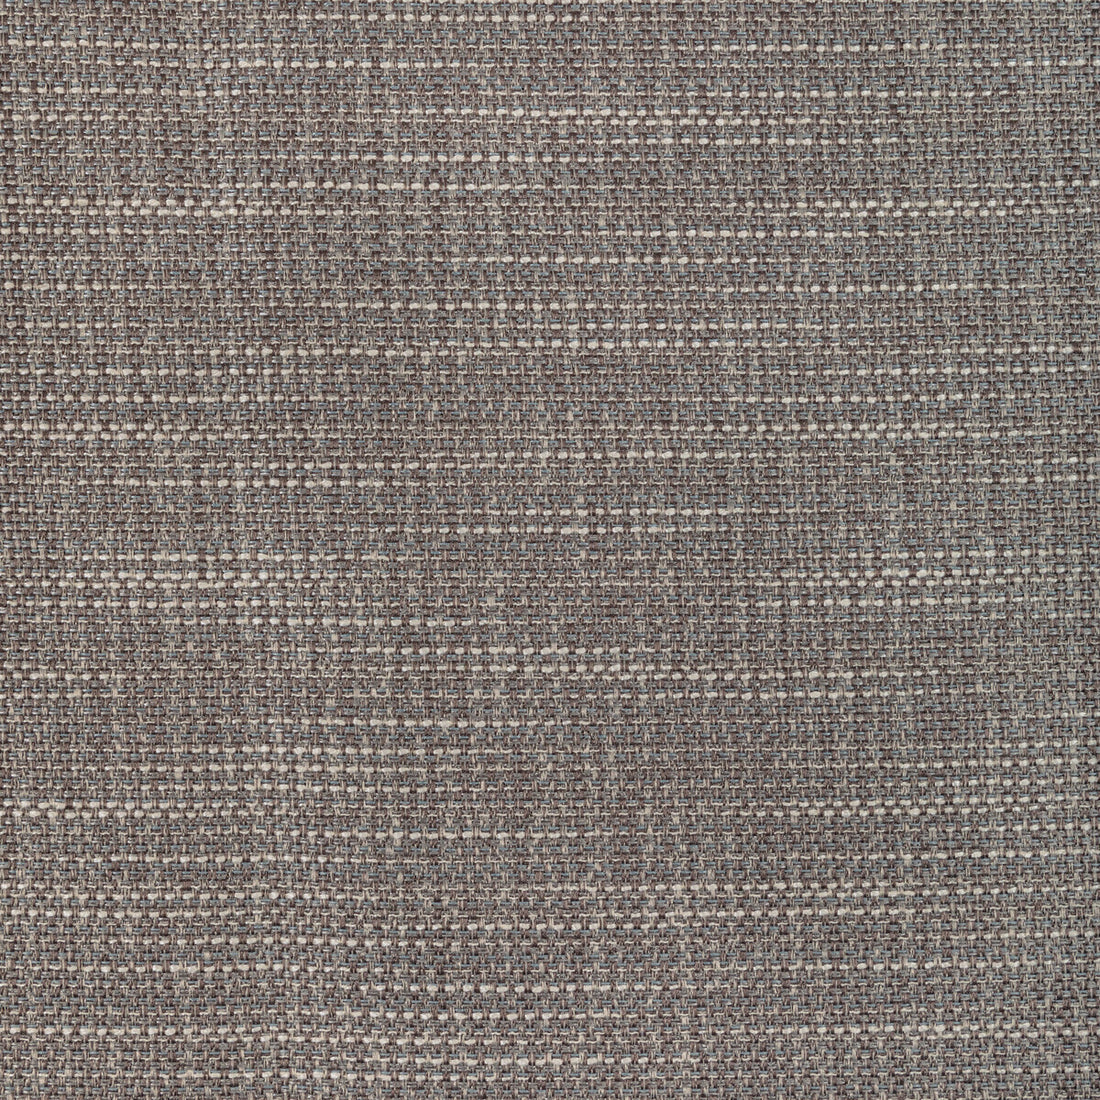 Luma Texture fabric in pewter color - pattern 4947.1521.0 - by Kravet Contract in the Fr Window Luma Texture collection